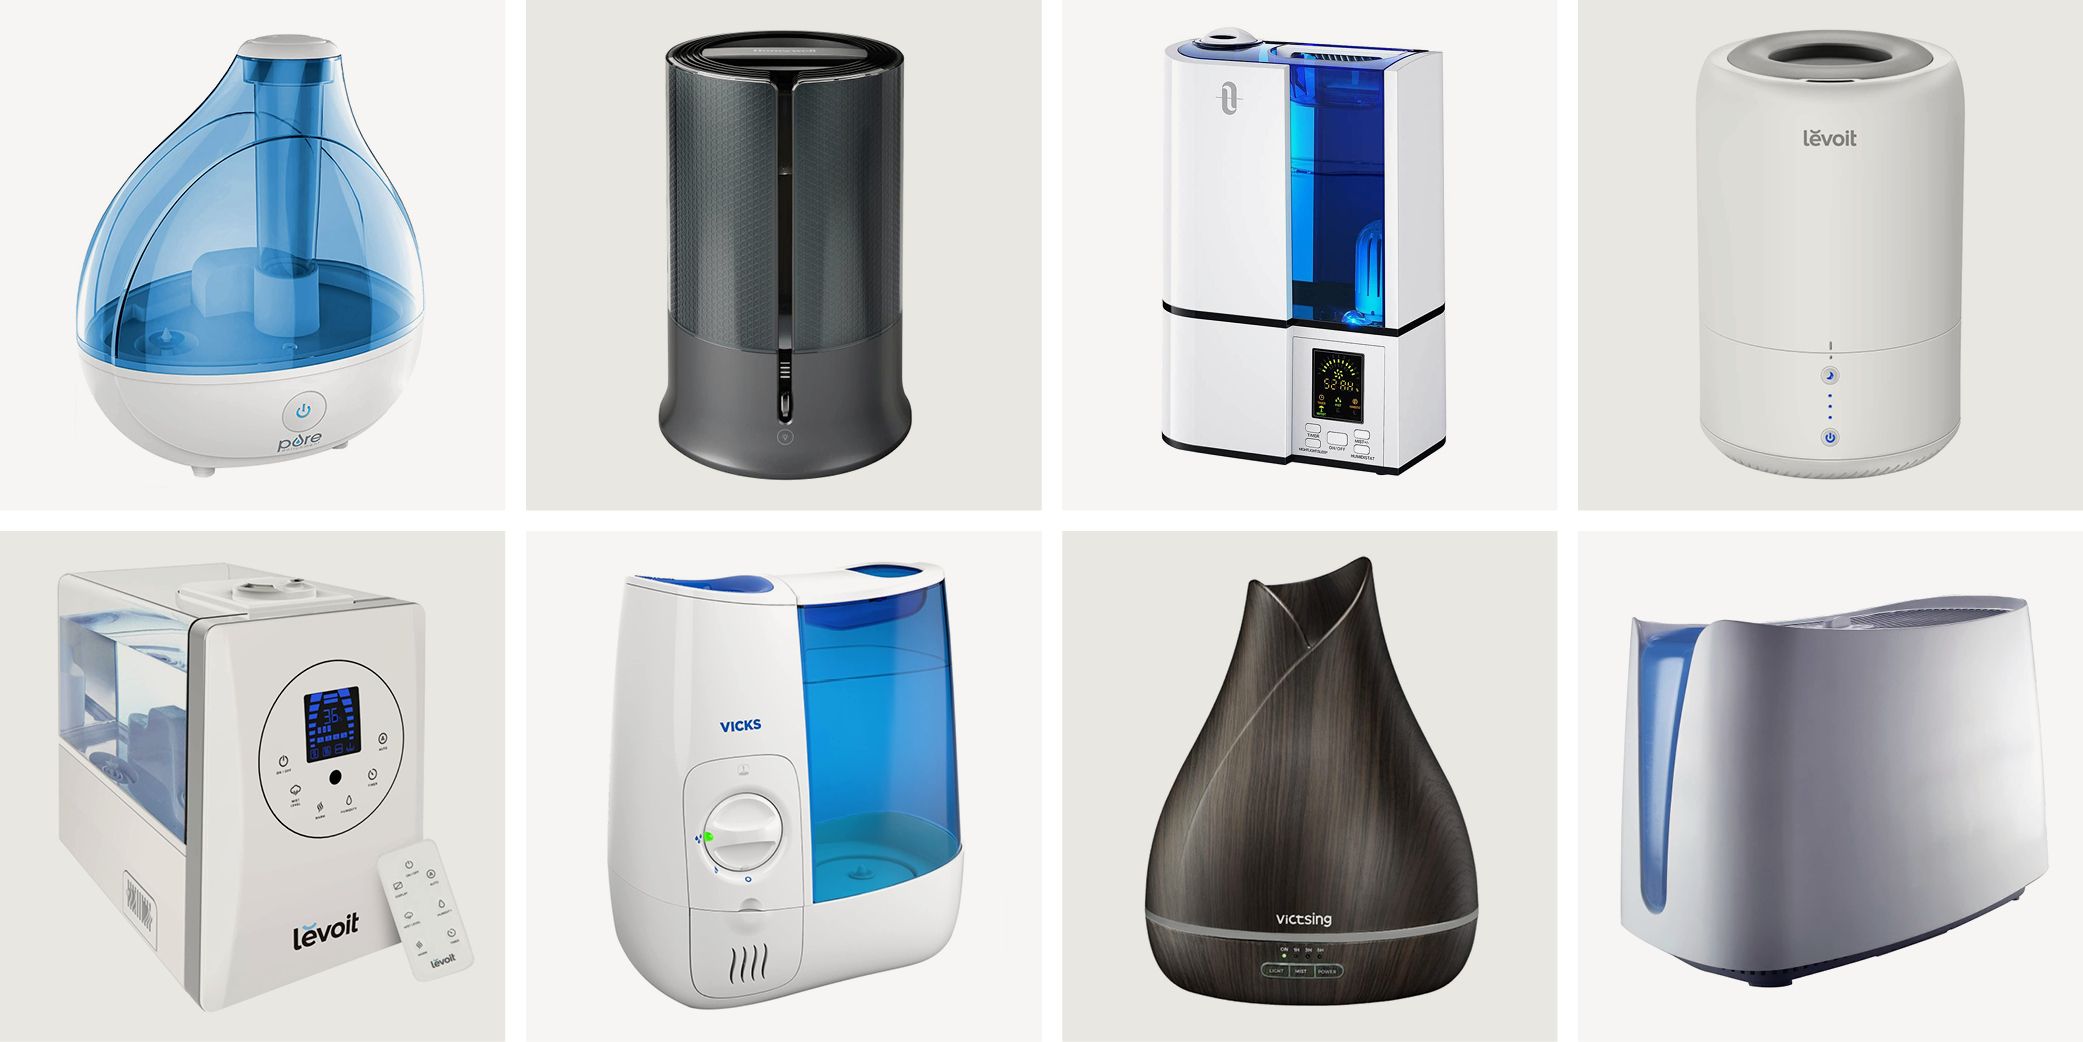 Best Humidifiers 2020 Humidifier Reviews,Recipes With Raspberries